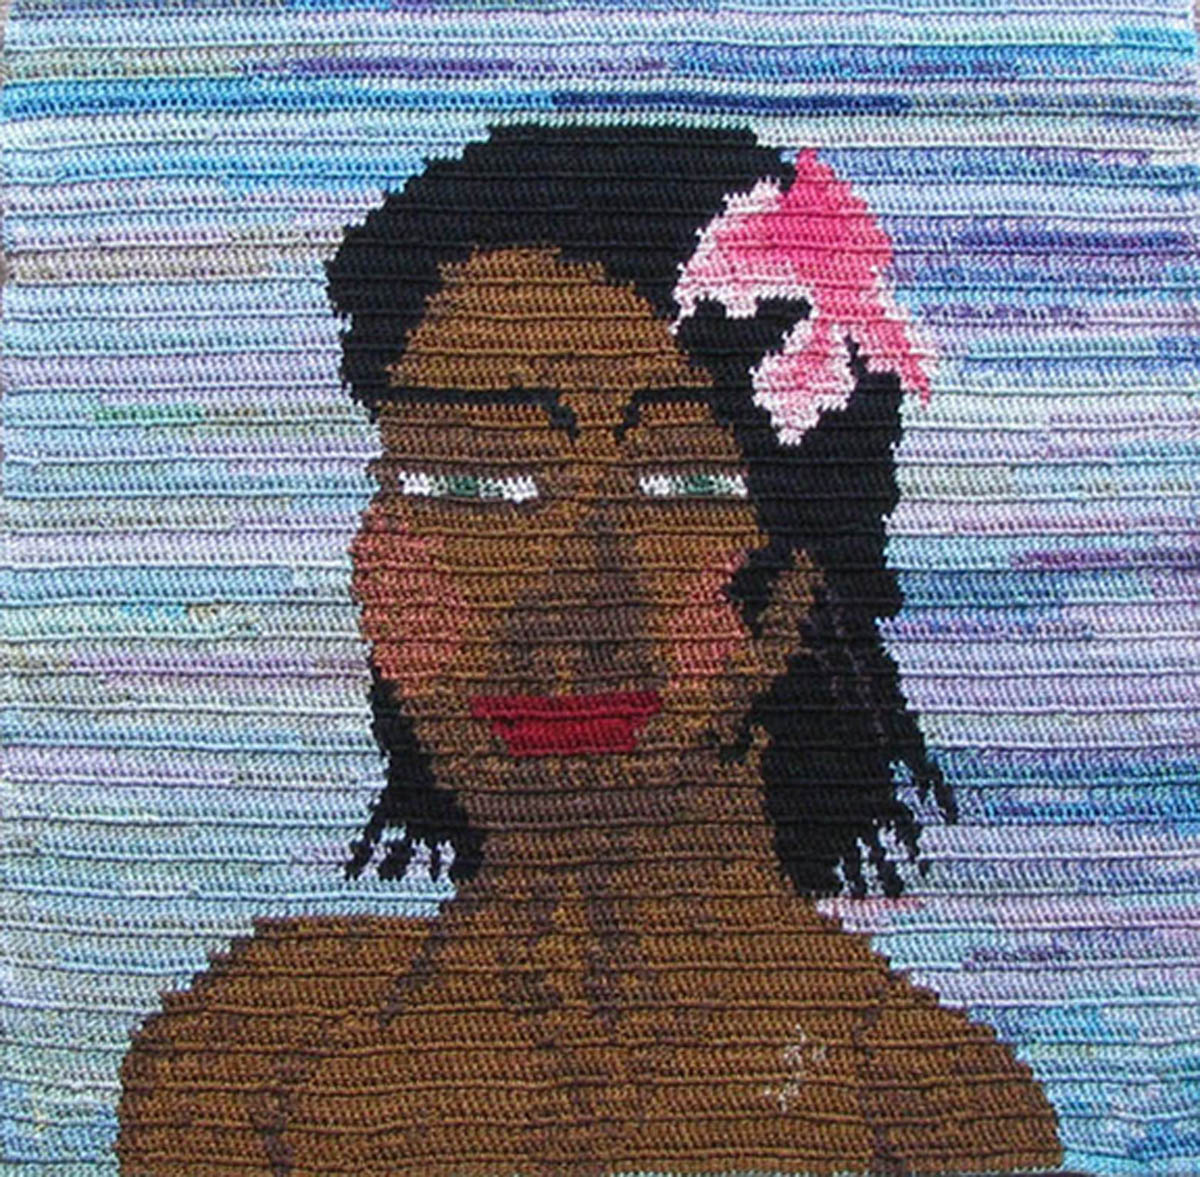 Lady with a Flower in Her Hair